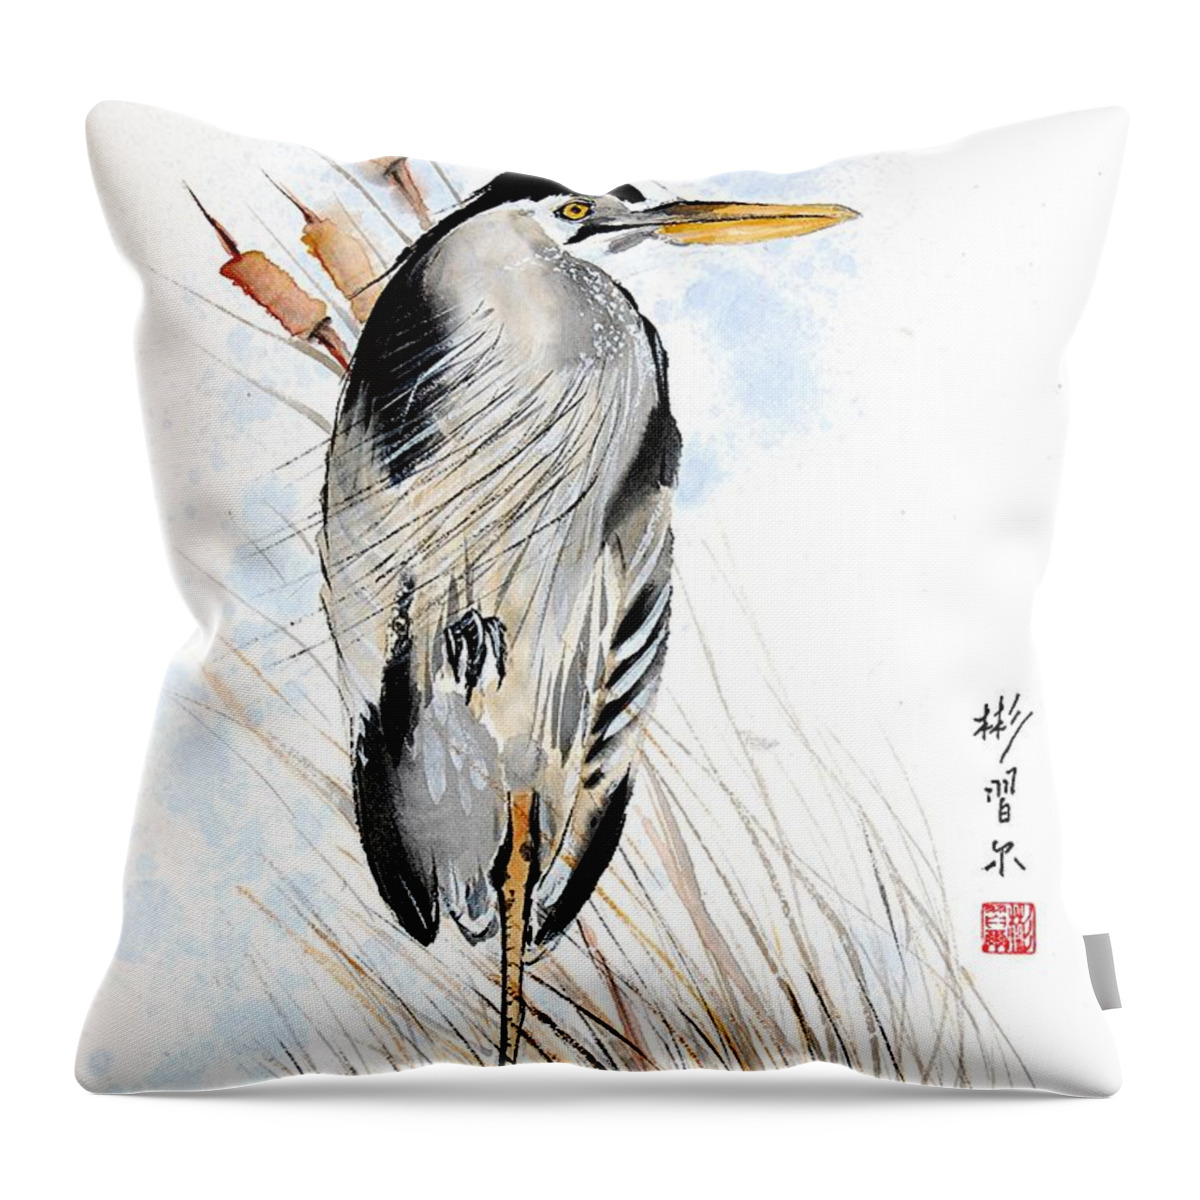 Chinese Brush Painting Throw Pillow featuring the painting Balanced Perspective by Bill Searle